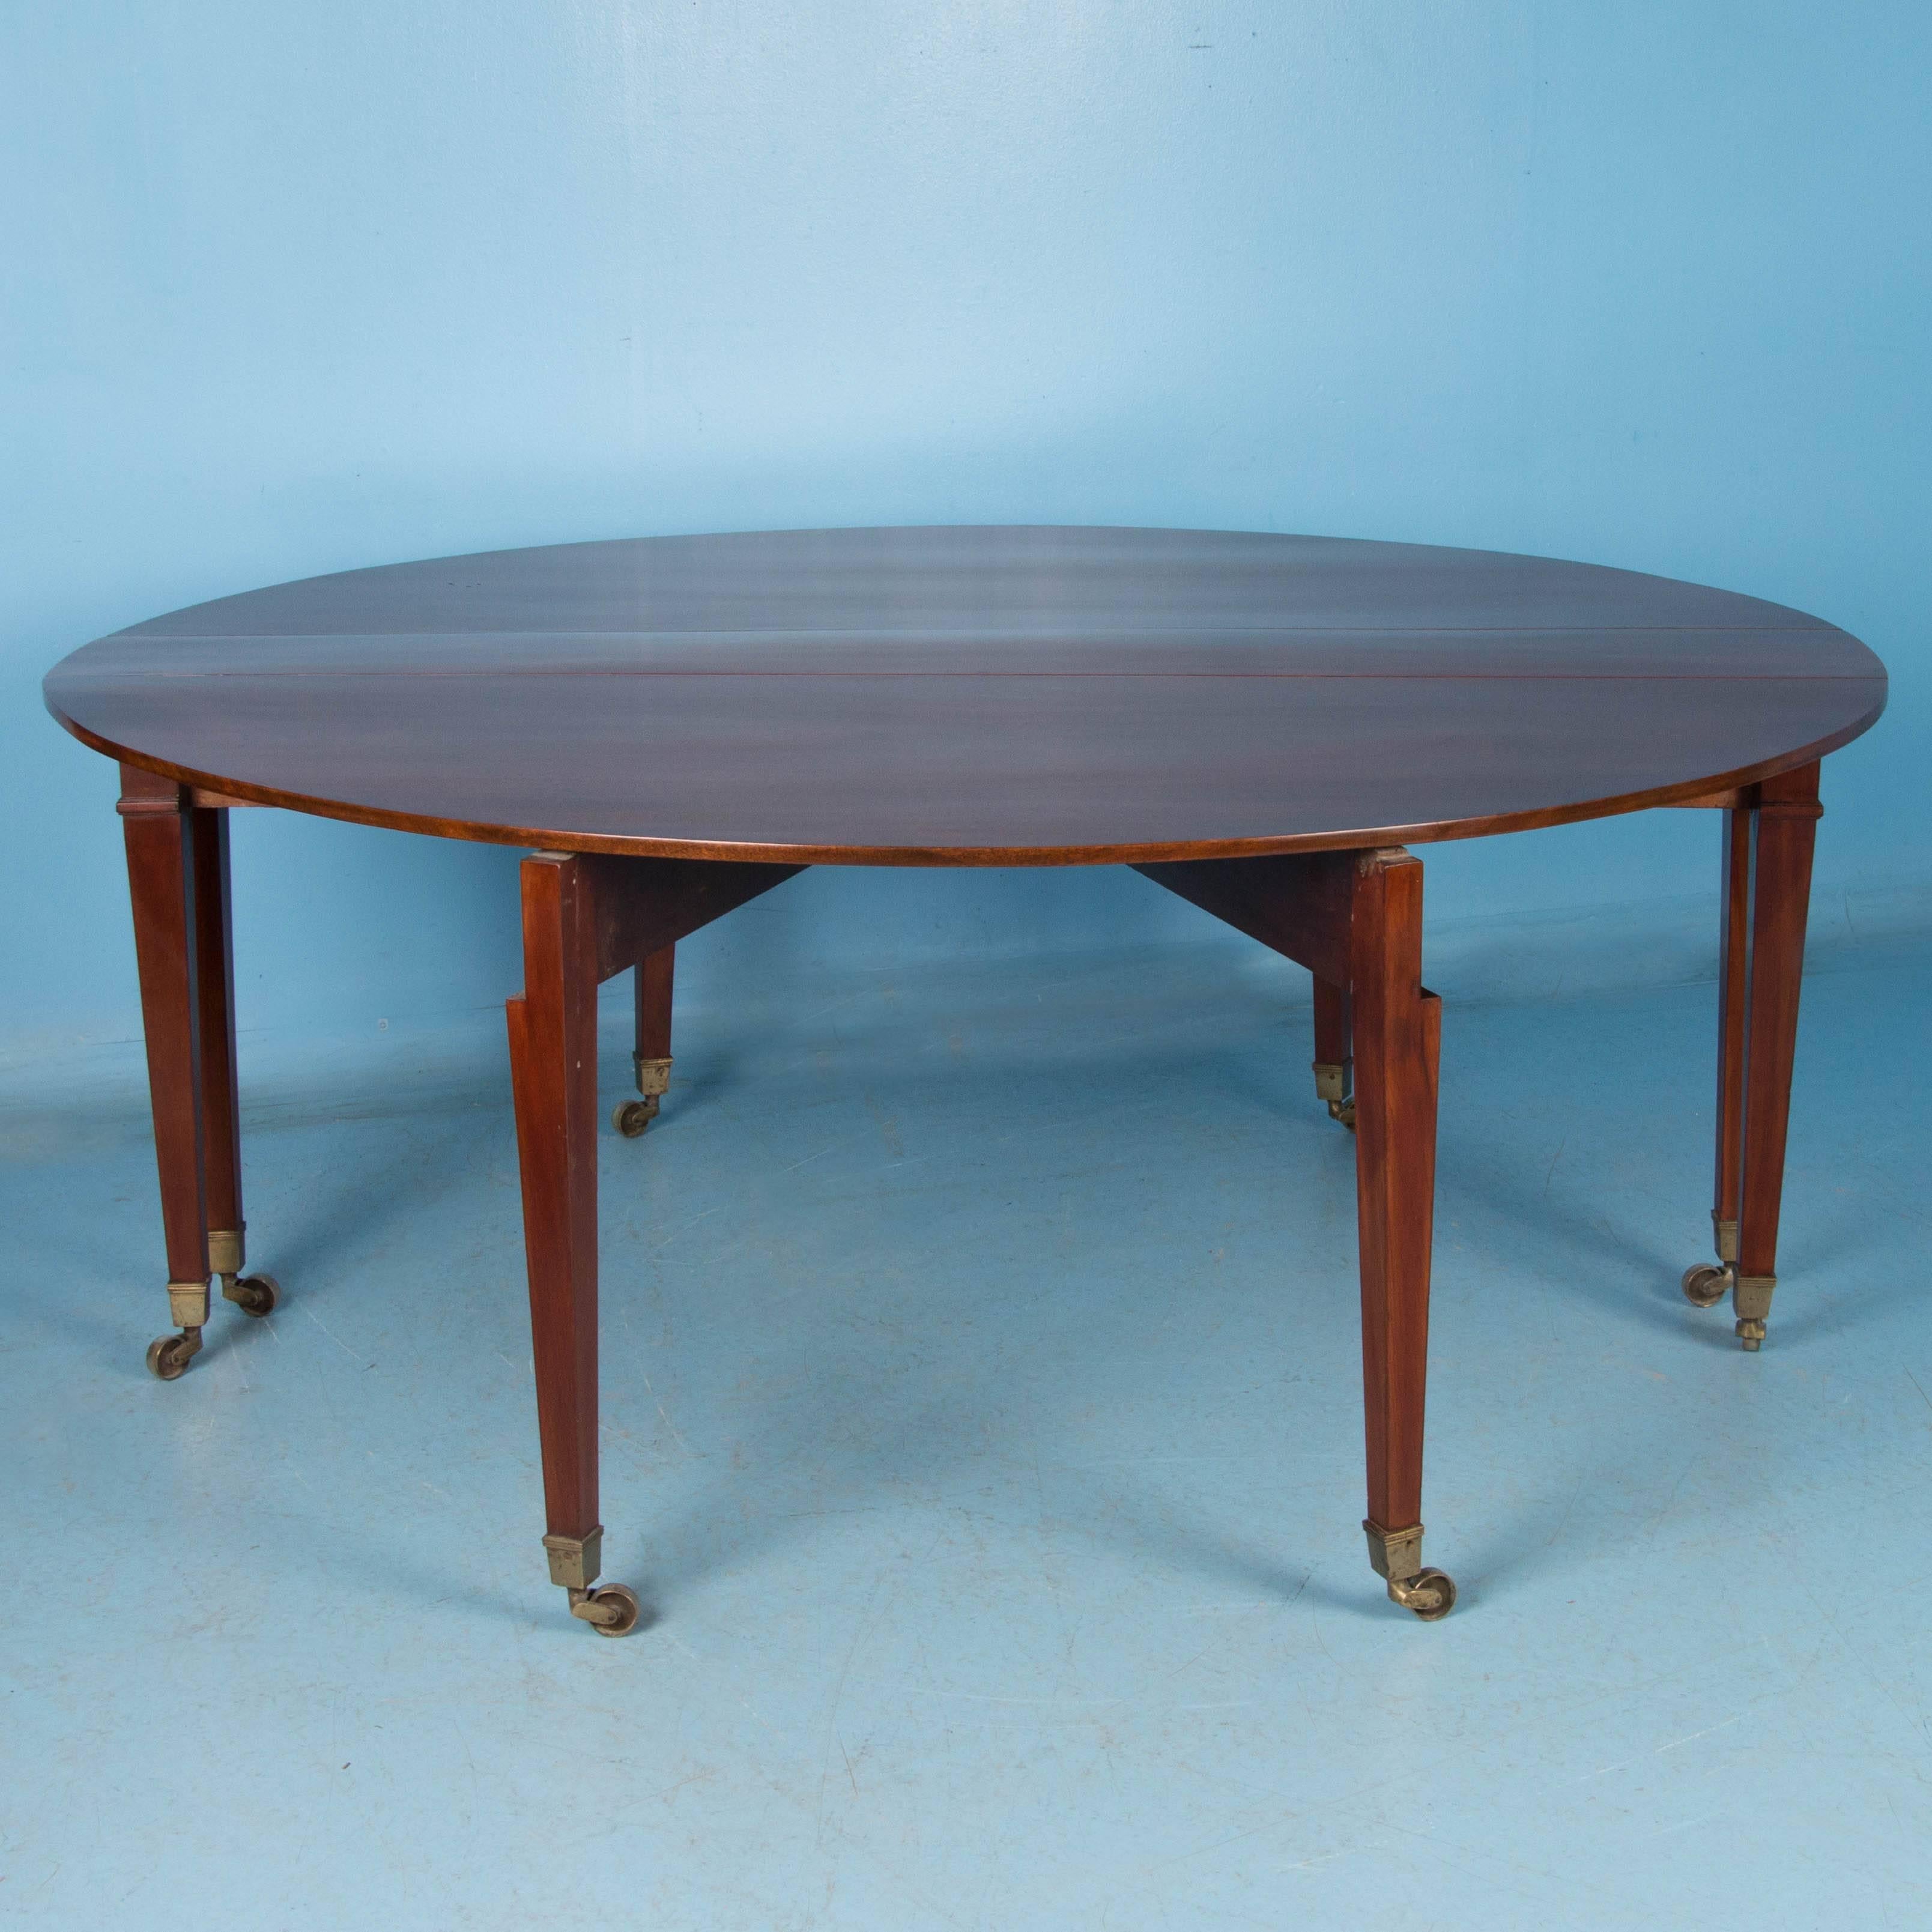 This elegant mahogany drop leaf table is very unique due to its large size and gate leg base. From the exceptional Swedish Karl Johan period, the Classic lines balance the stunning mahogany top gracefully. When closed, the table is only 10.75 inches